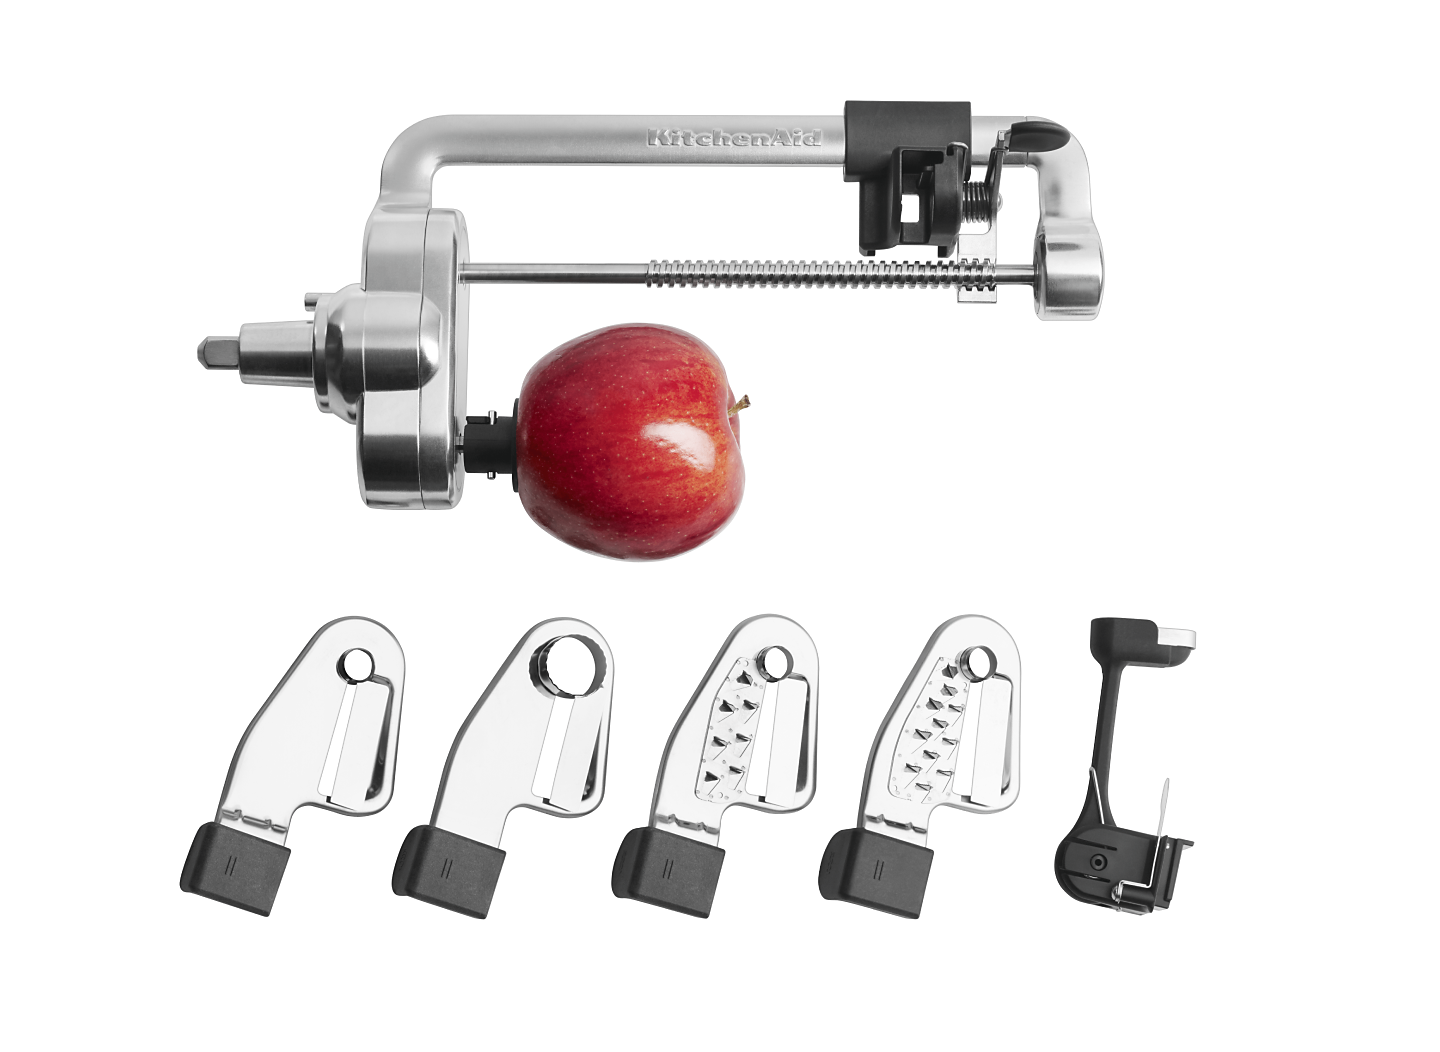 Stand mixer blade attachments and an apple.